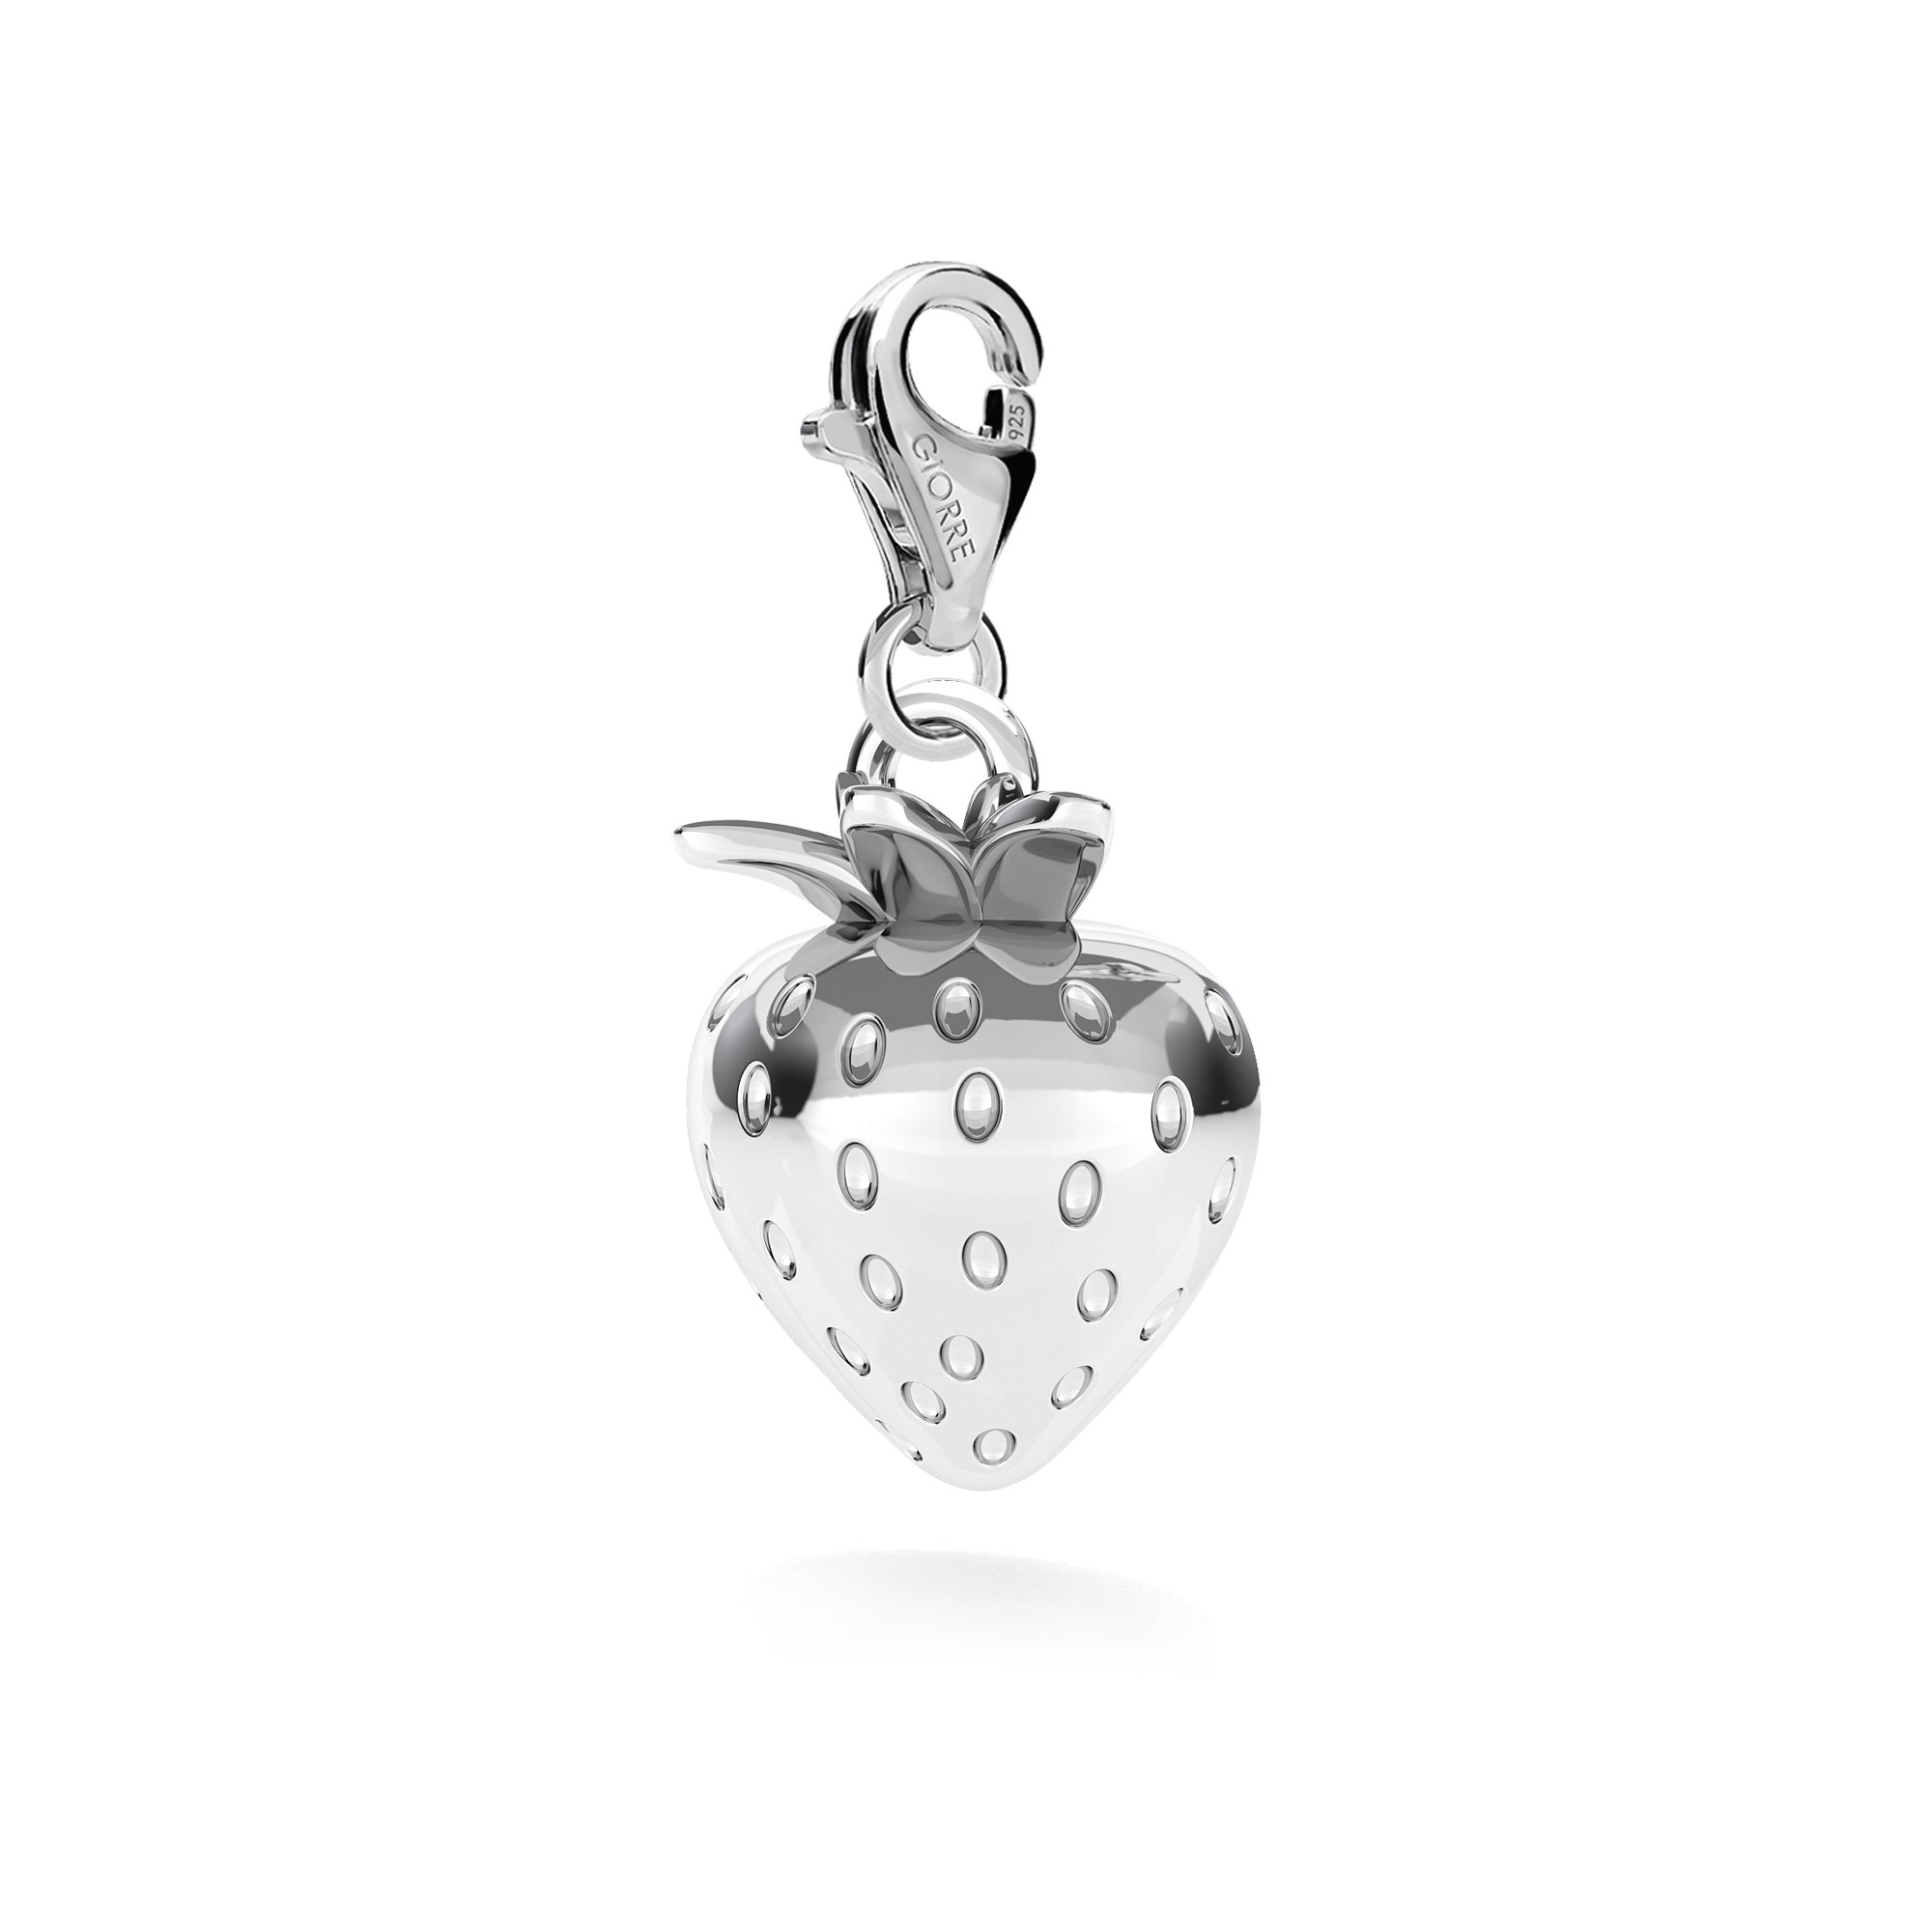 Humming-bird pendant charms bead sterling silver